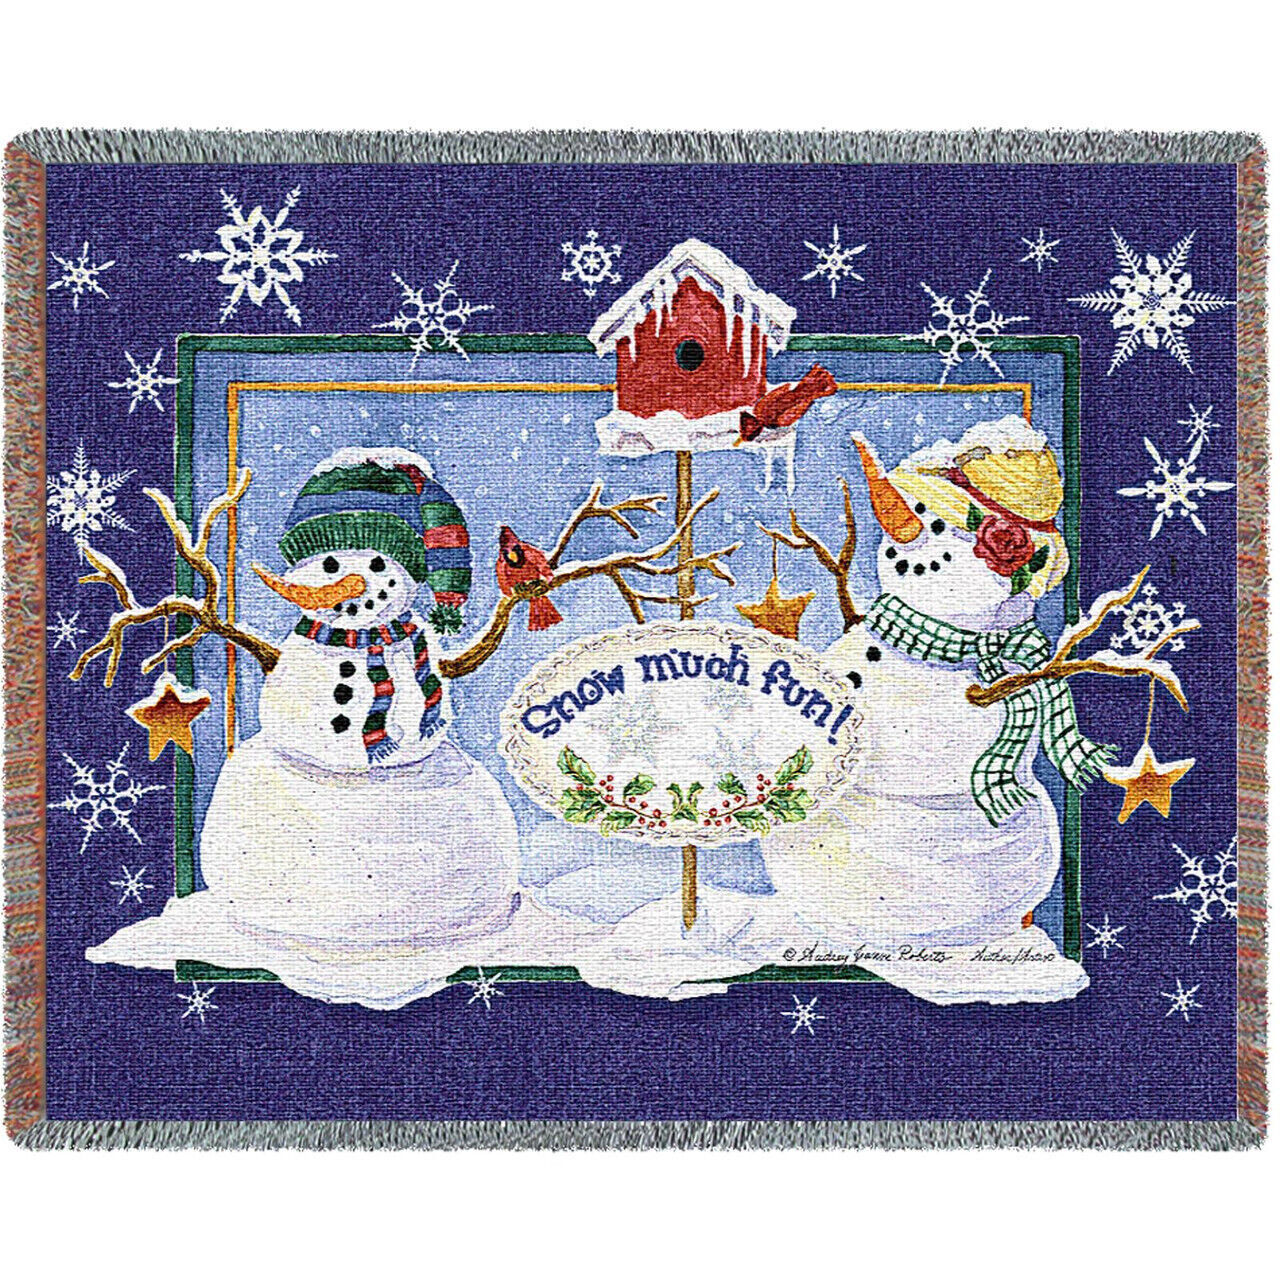 72x54 SNOW MUCH FUN Snowman Winter Christmas Holiday Tapestry Throw Blanket  - $63.36